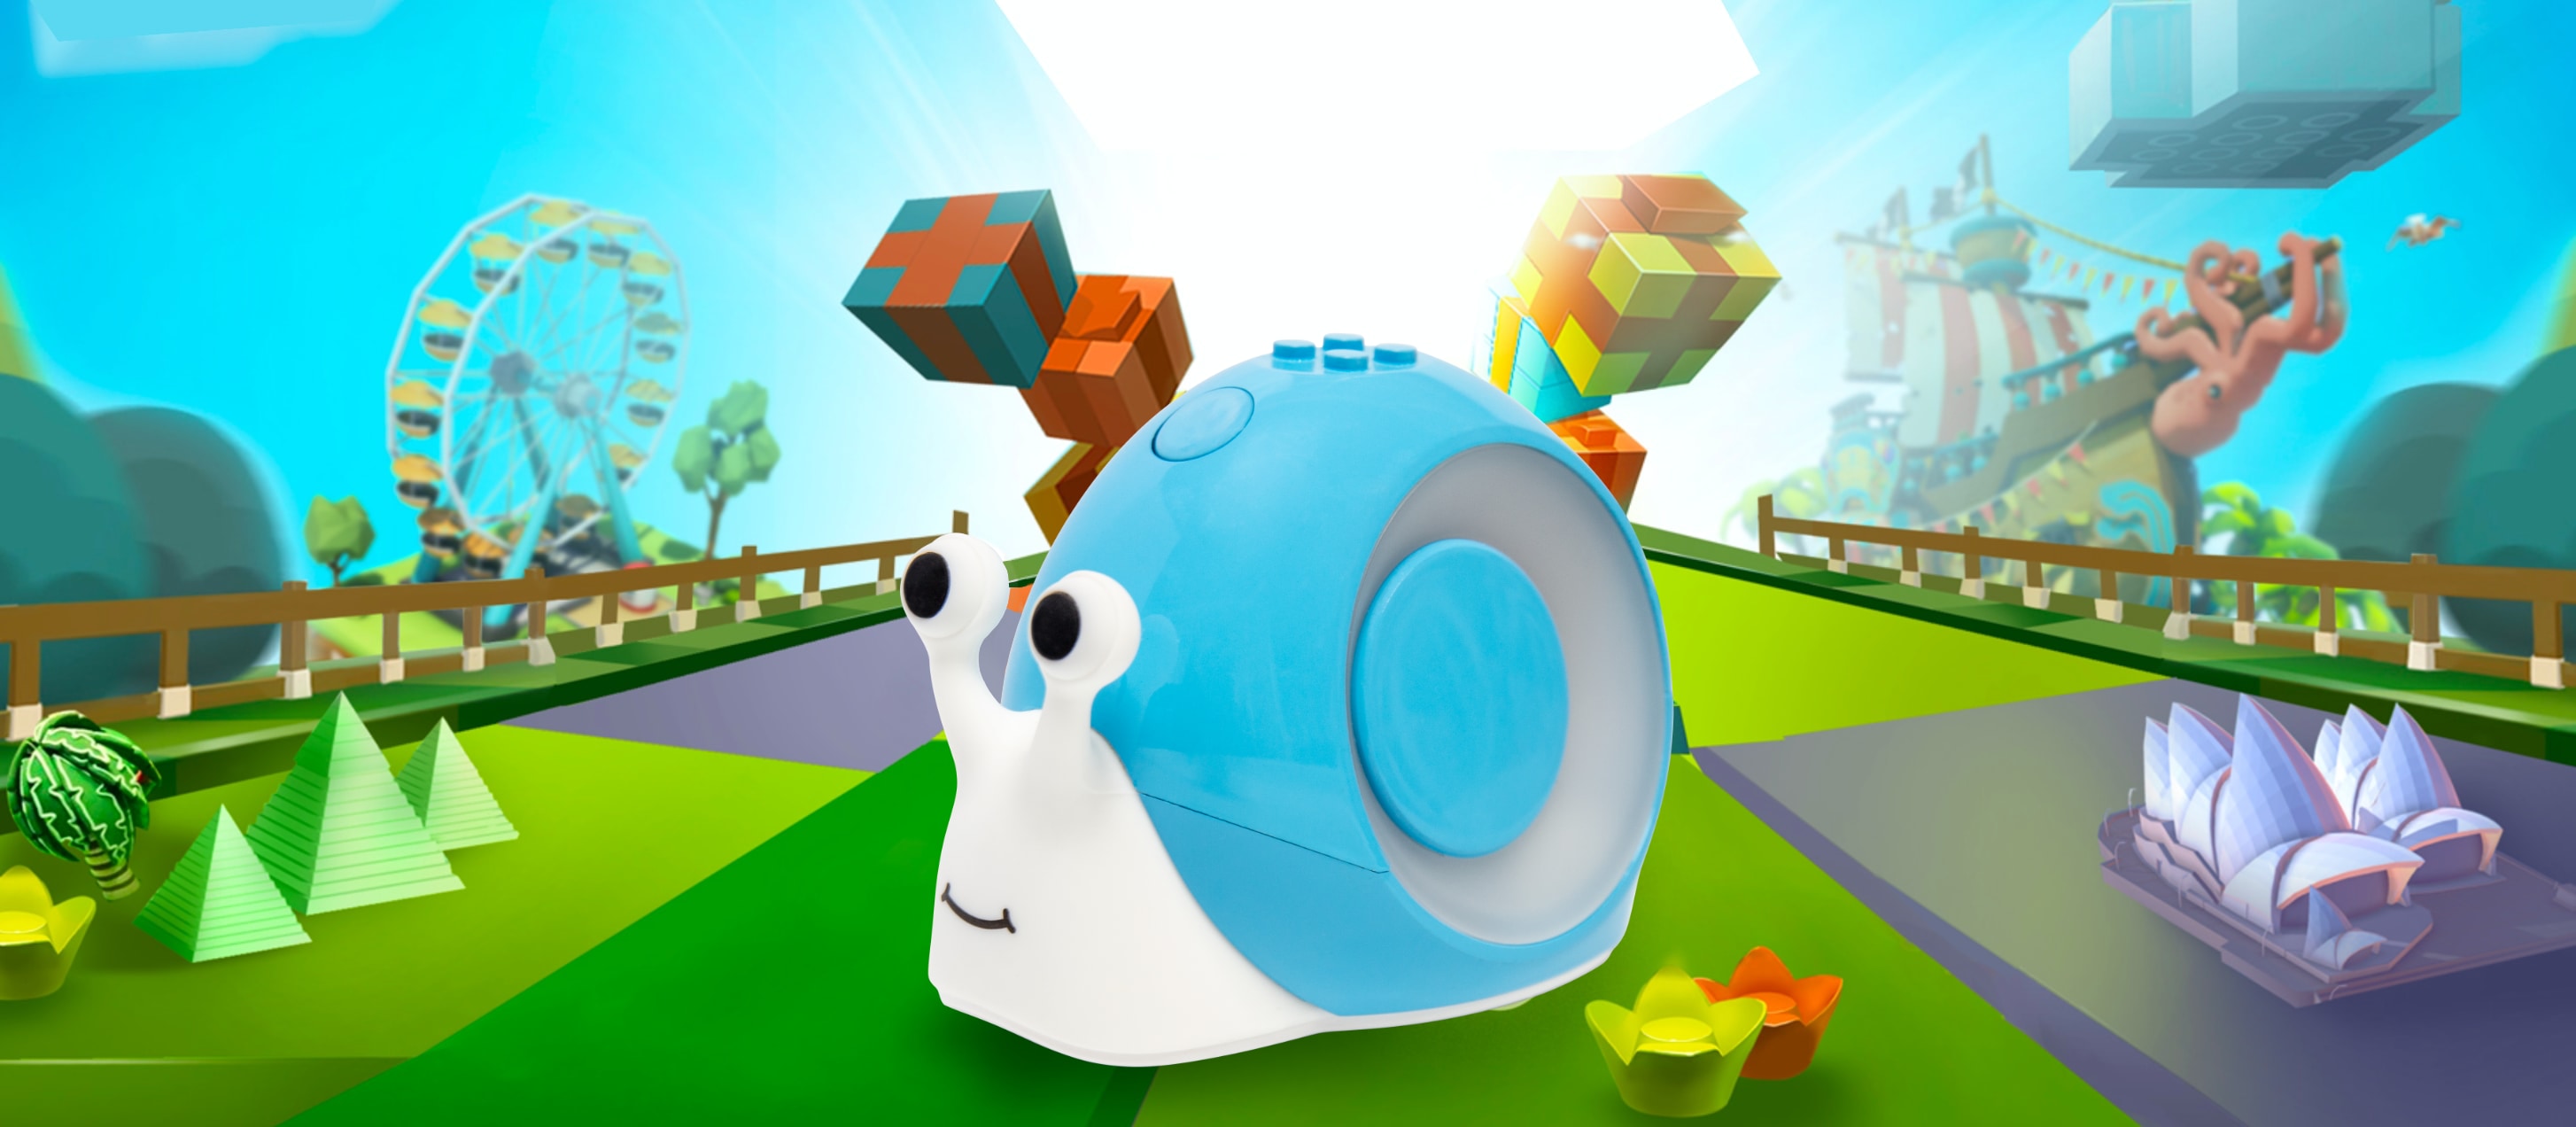 Robobloq Qobo Snail Coding Robot w/ Puzzle Card for Kids Aged 3+ Year